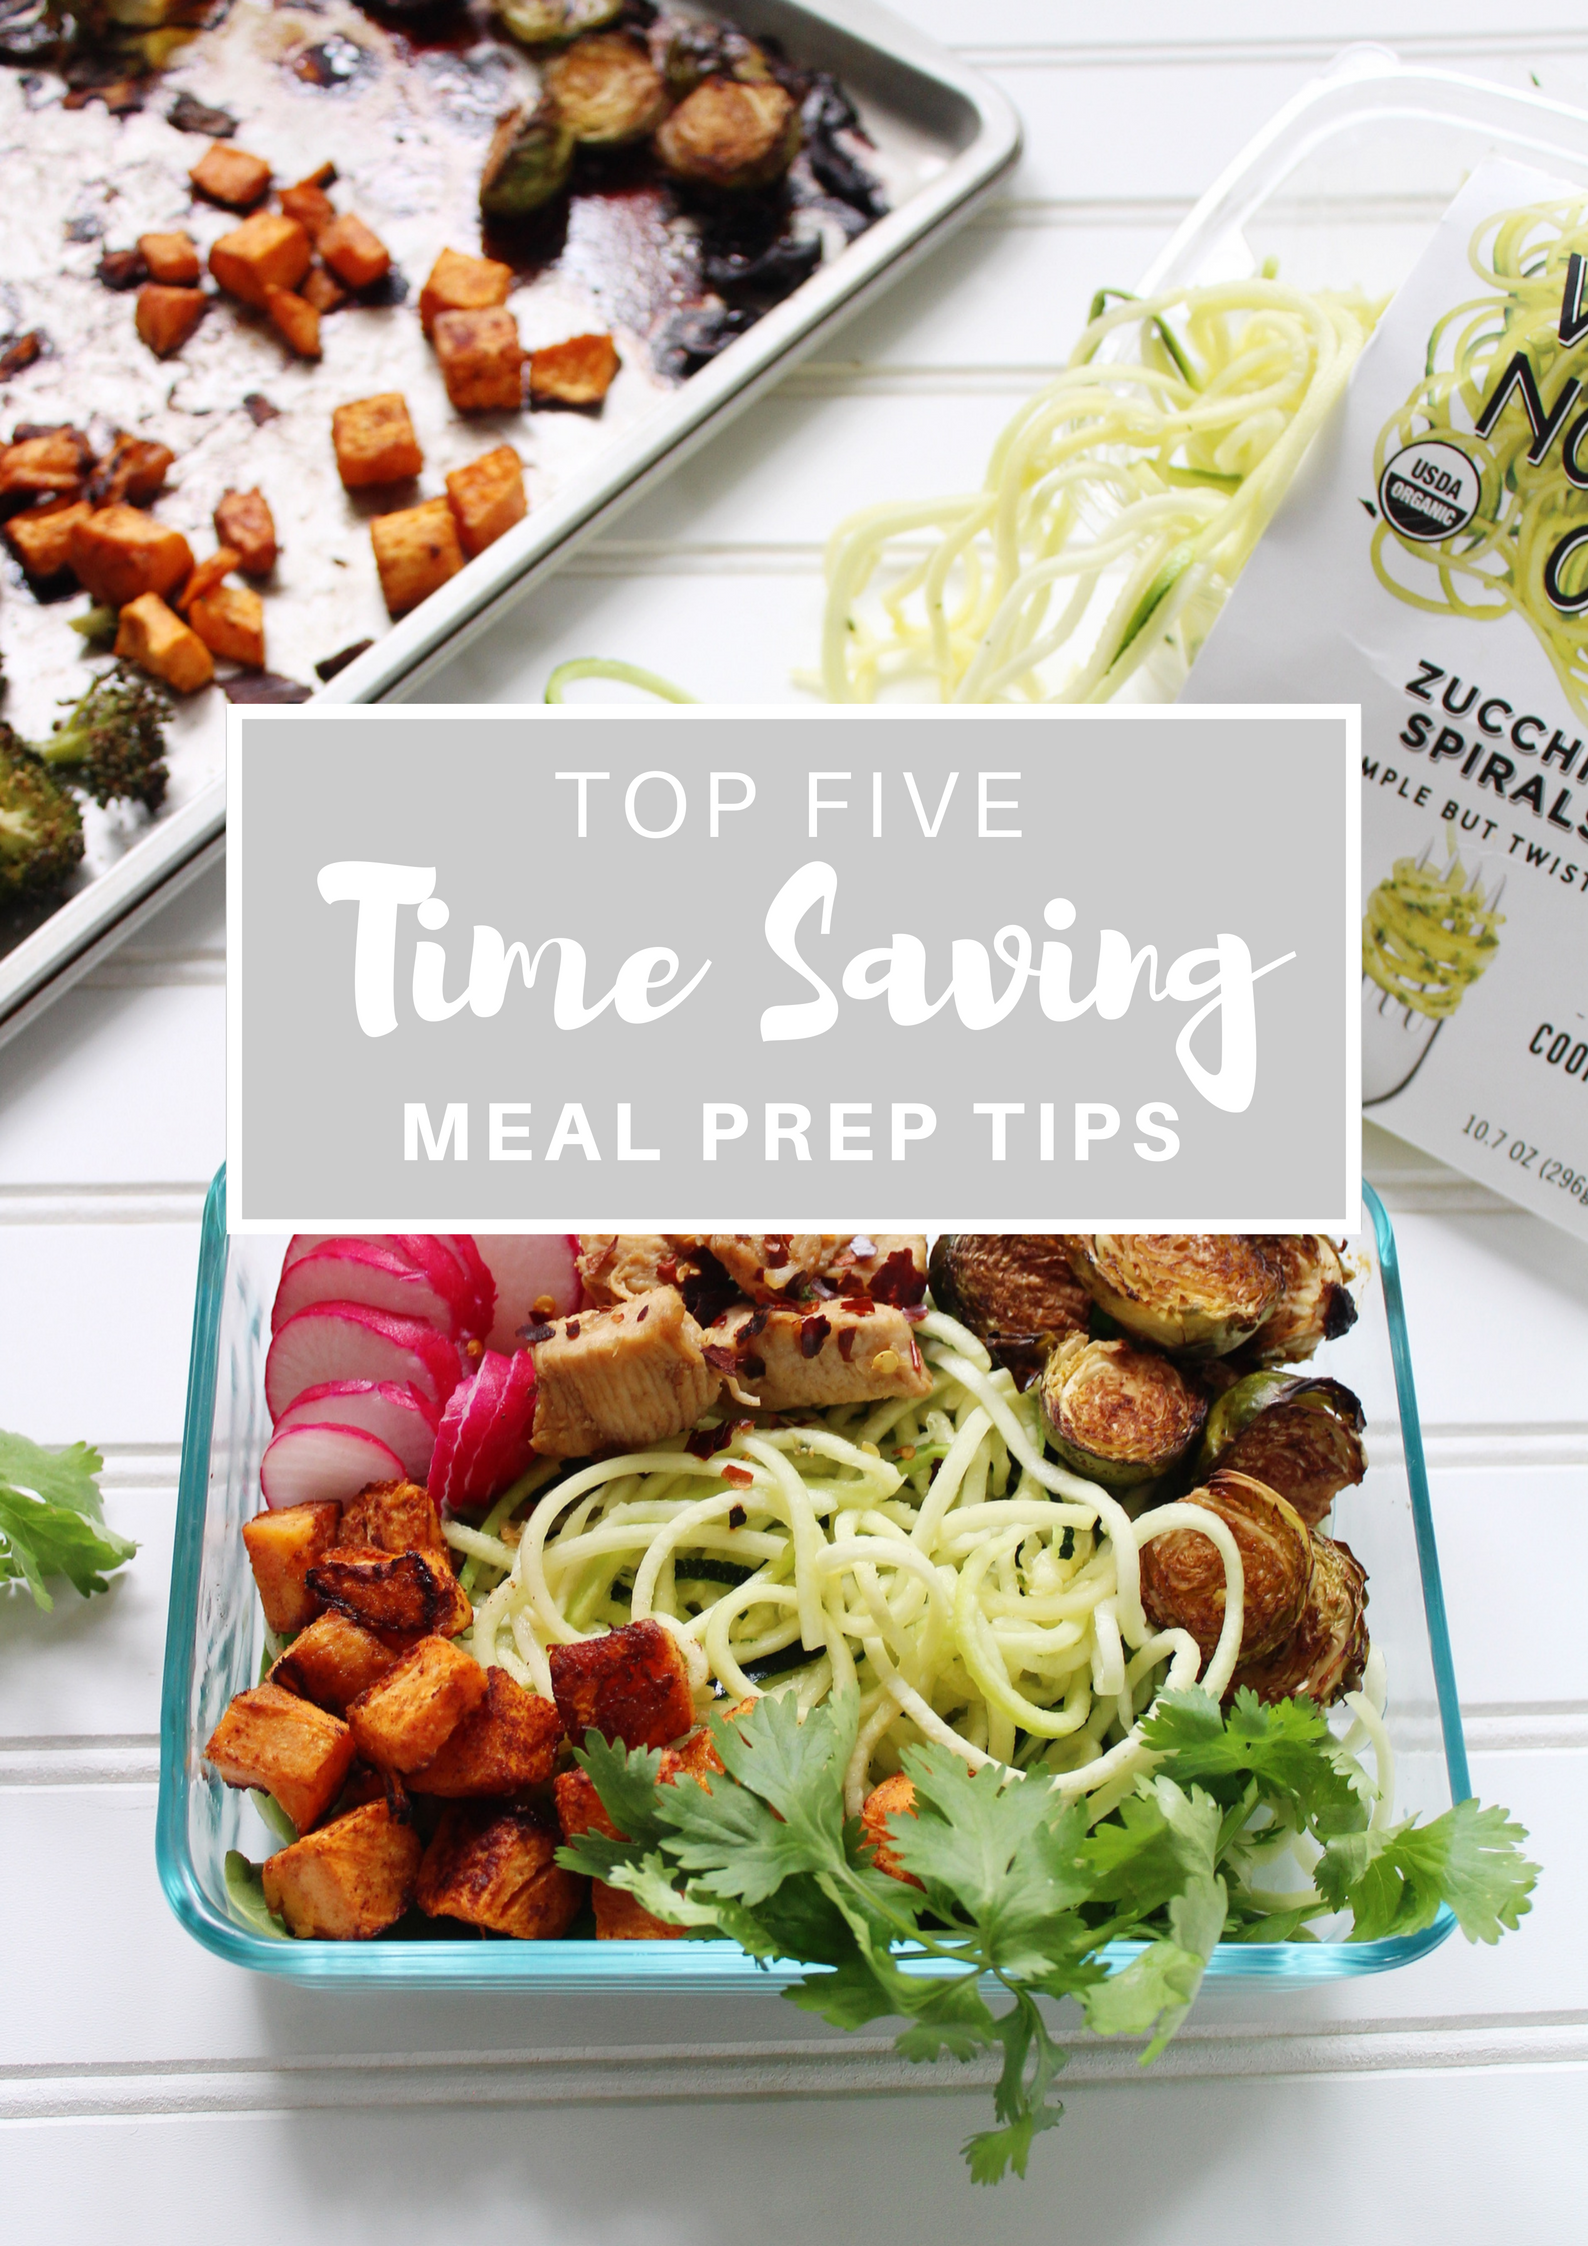 5 Meal Prep Tips to Save You Time in the Kitchen and Make Your Life Easier